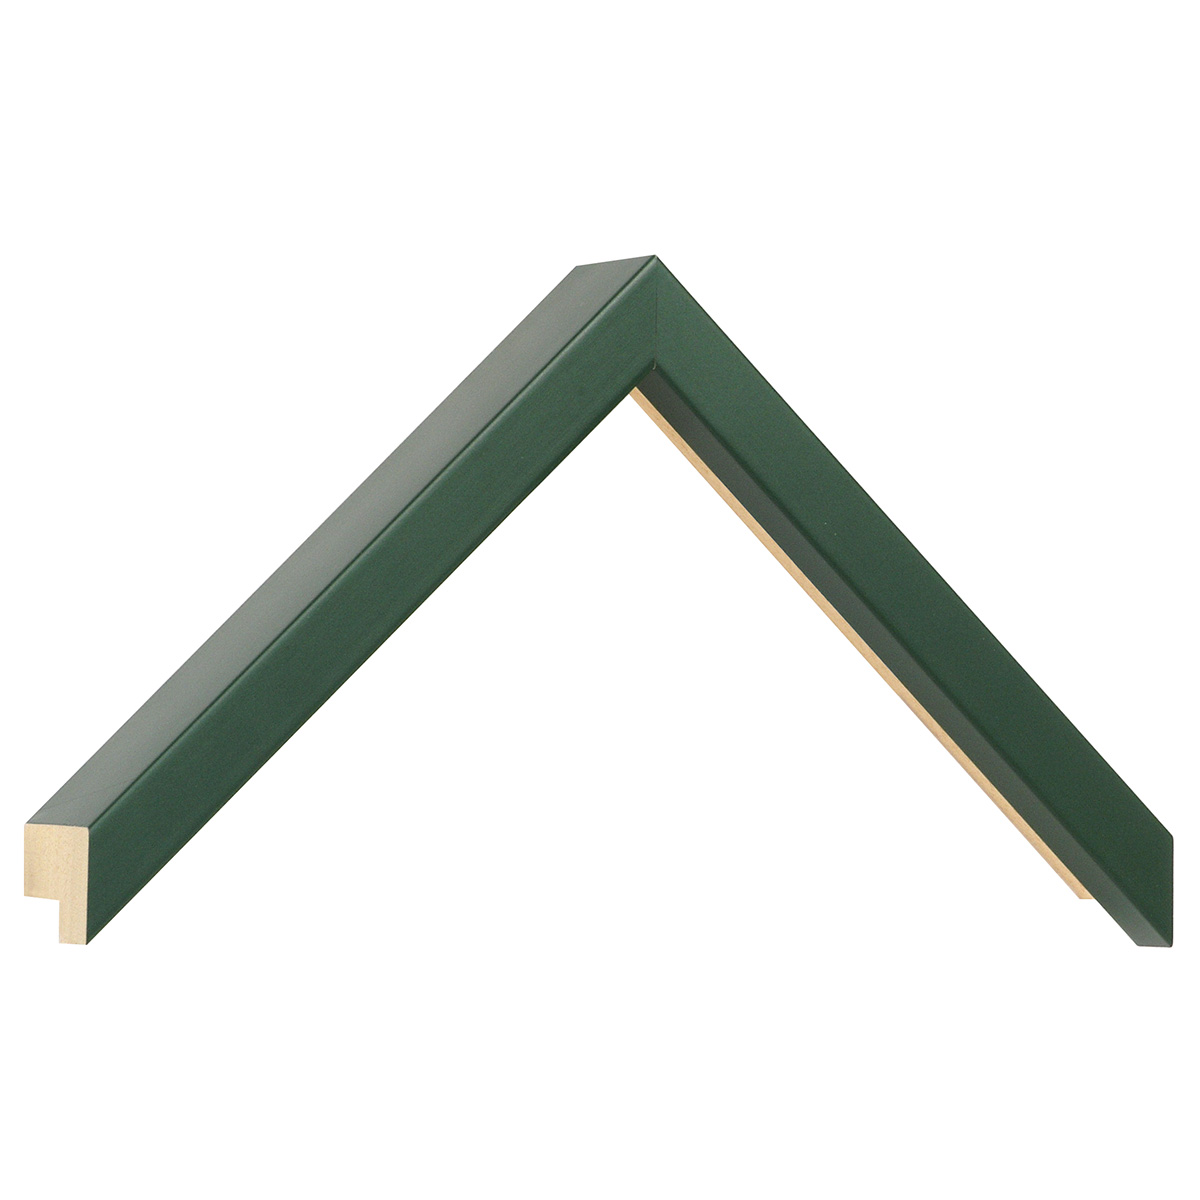 Moulding ayous - Widht 15 mm - Height 40 mm - Green - Sample